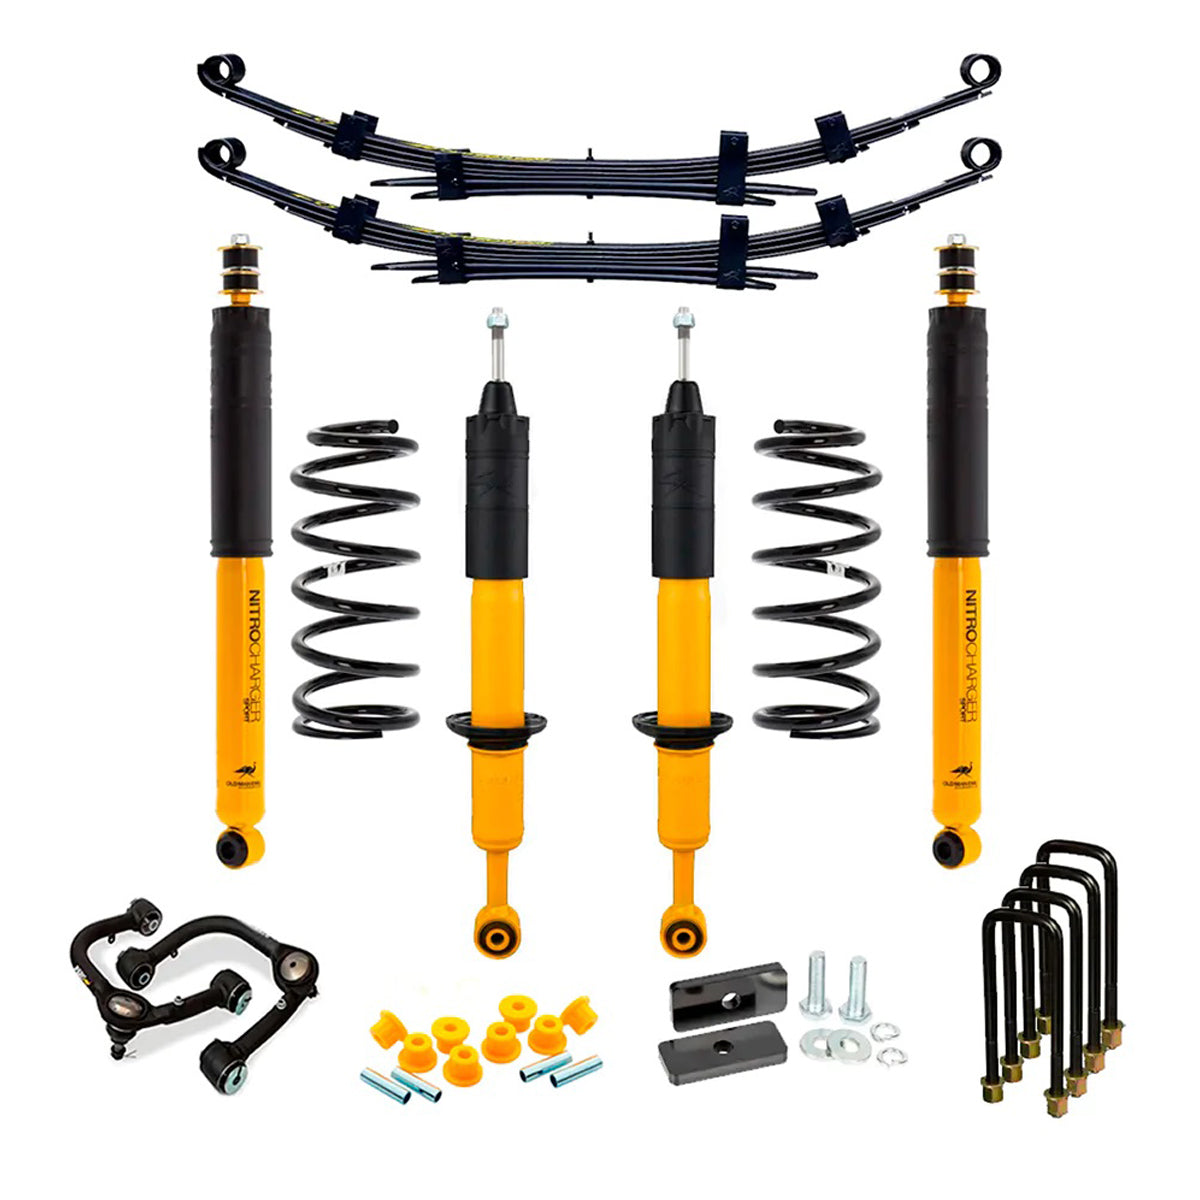 OME 3 inch Lift Kit for Tacoma (16-23)